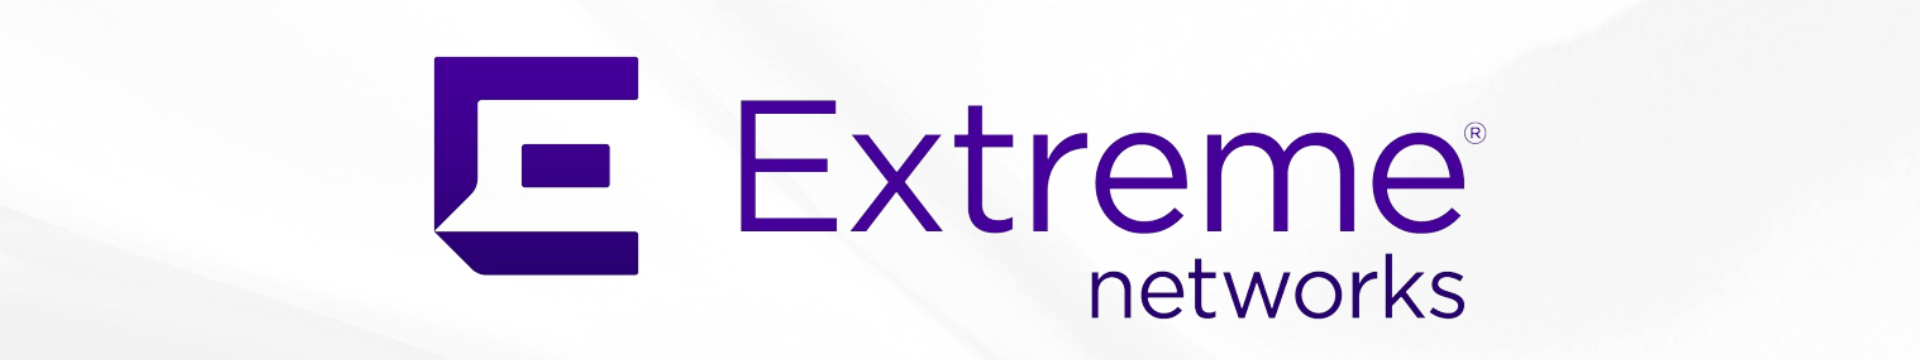 EXTREME NETWORKS, BUY EXTREME NETWORKS